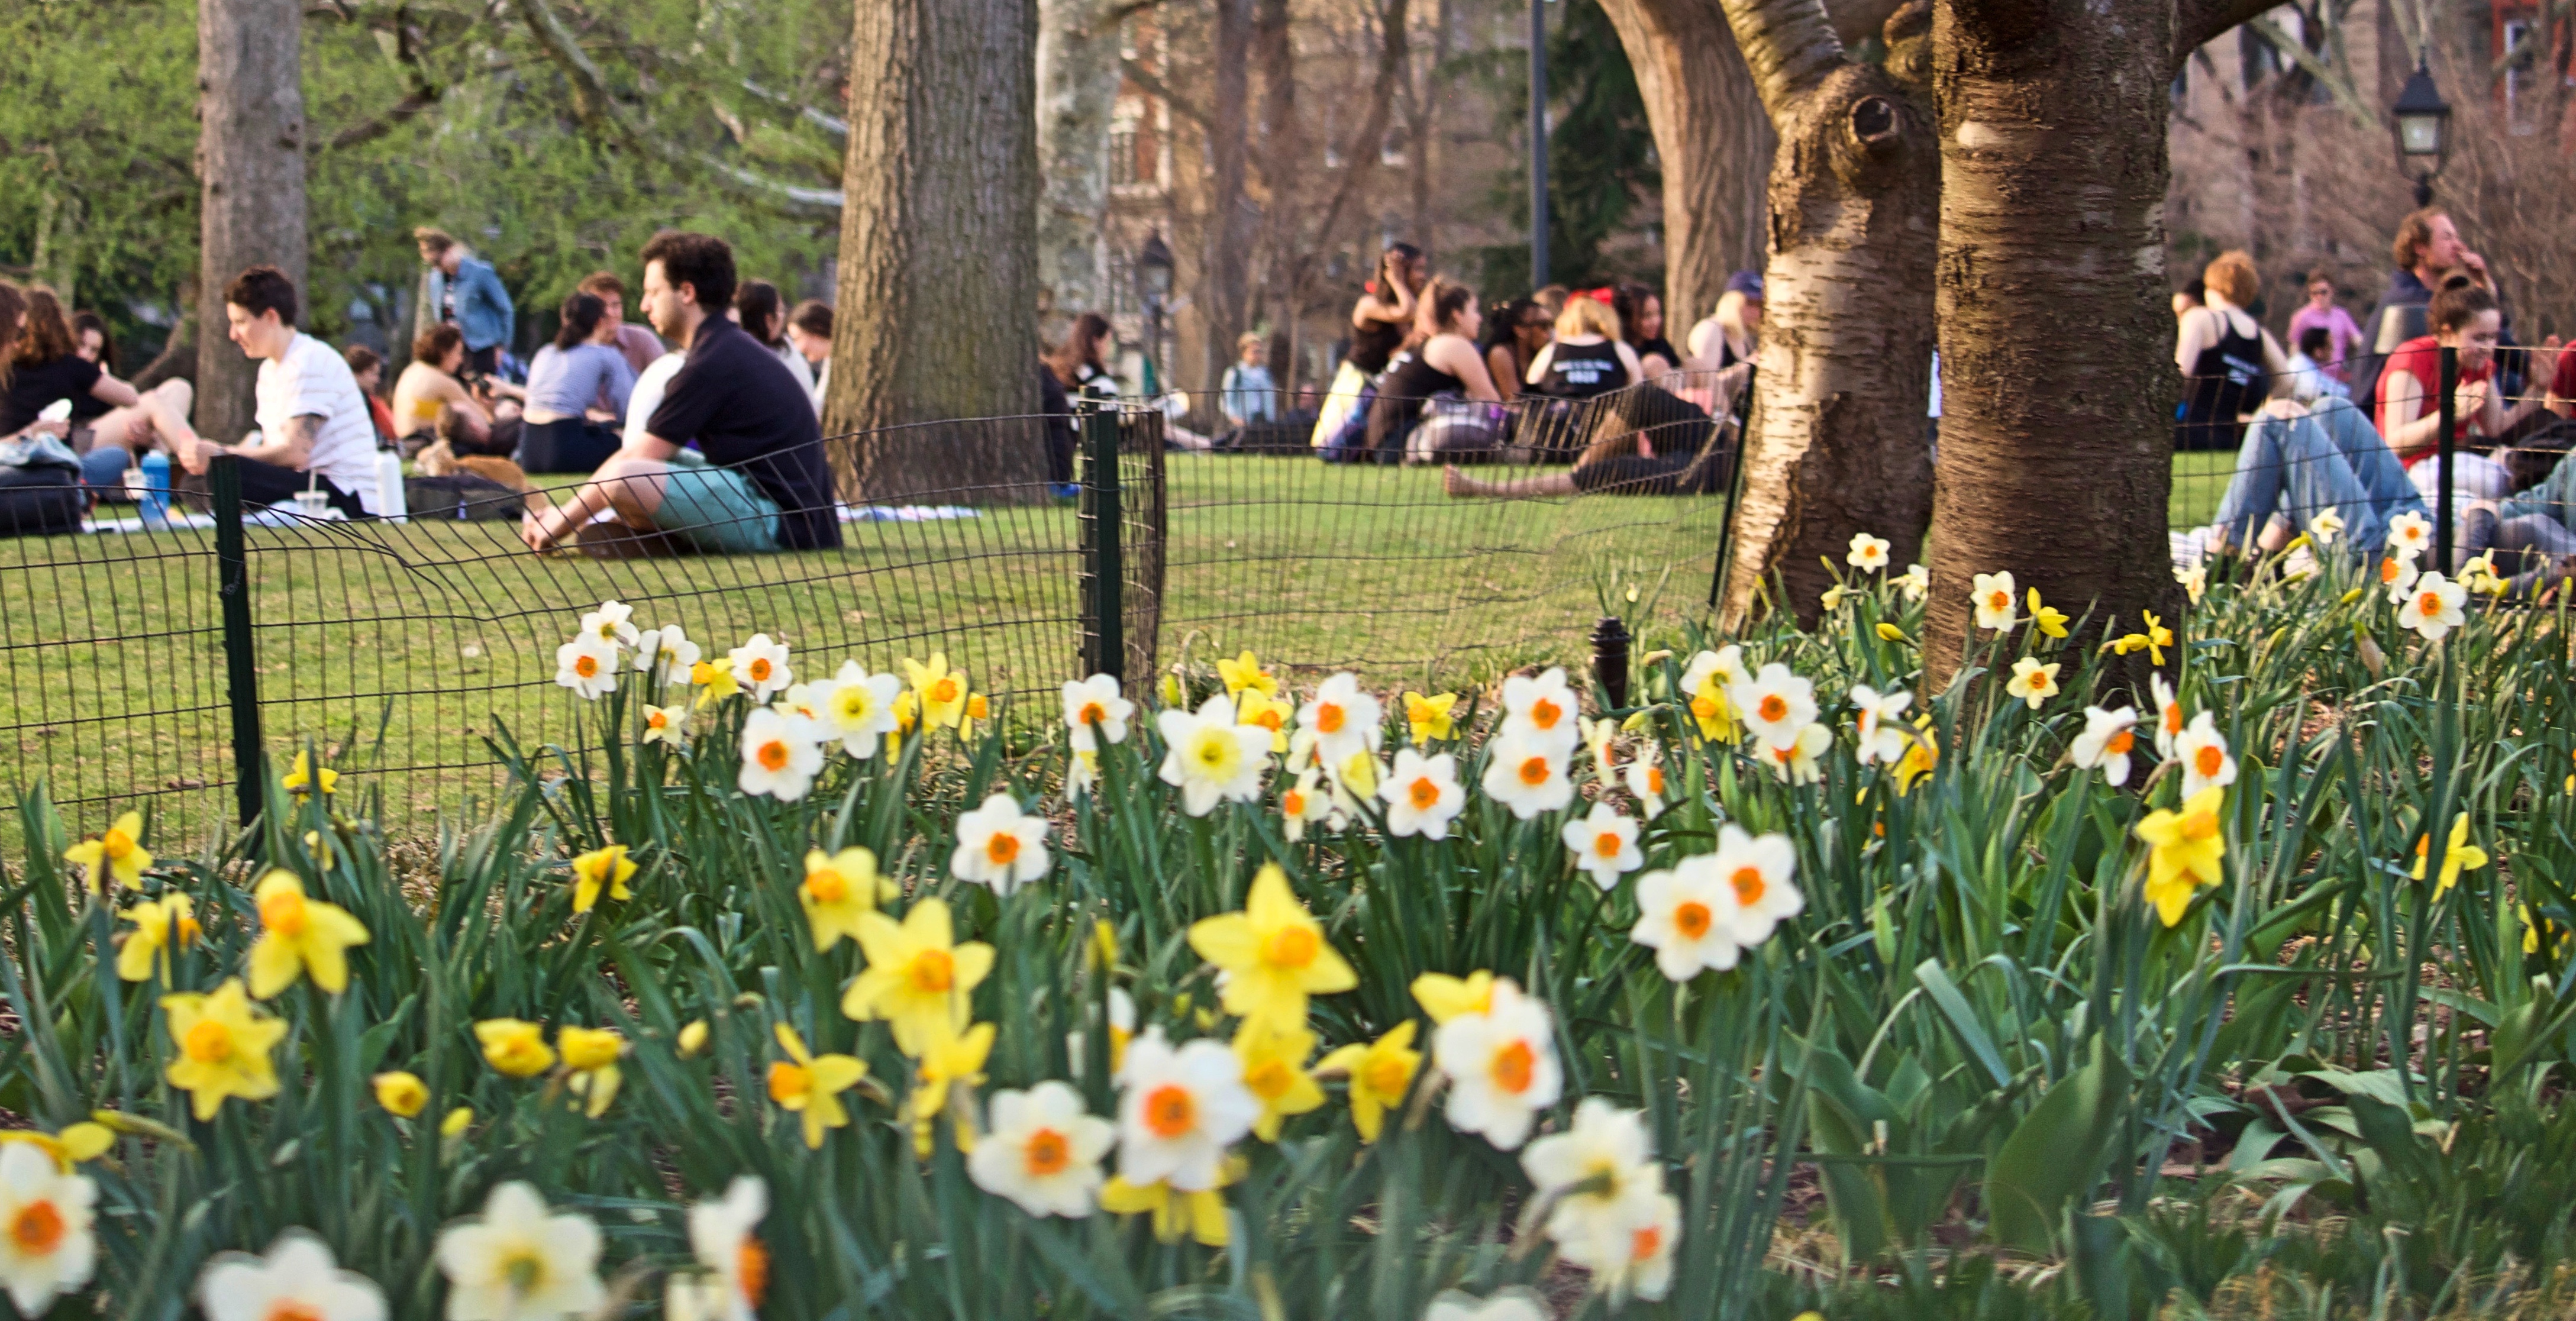 A swath of yellow and white daffodils in the foreground, people sitting on grass in the background